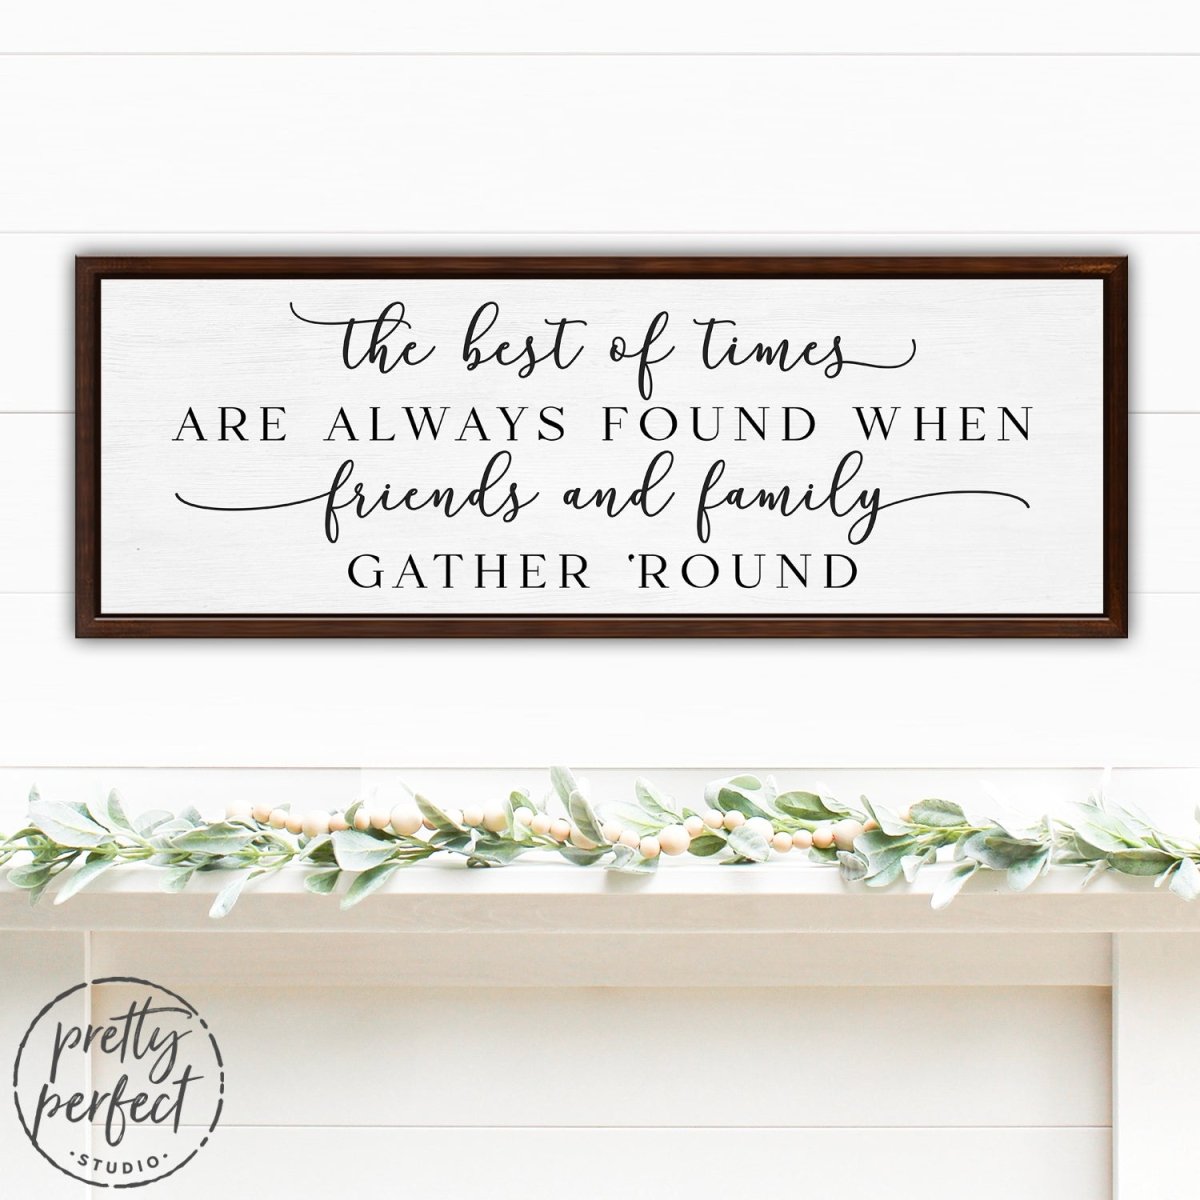 The Best Of Times Are Always Found Sign For Entryway of Home - Pretty Perfect Studio